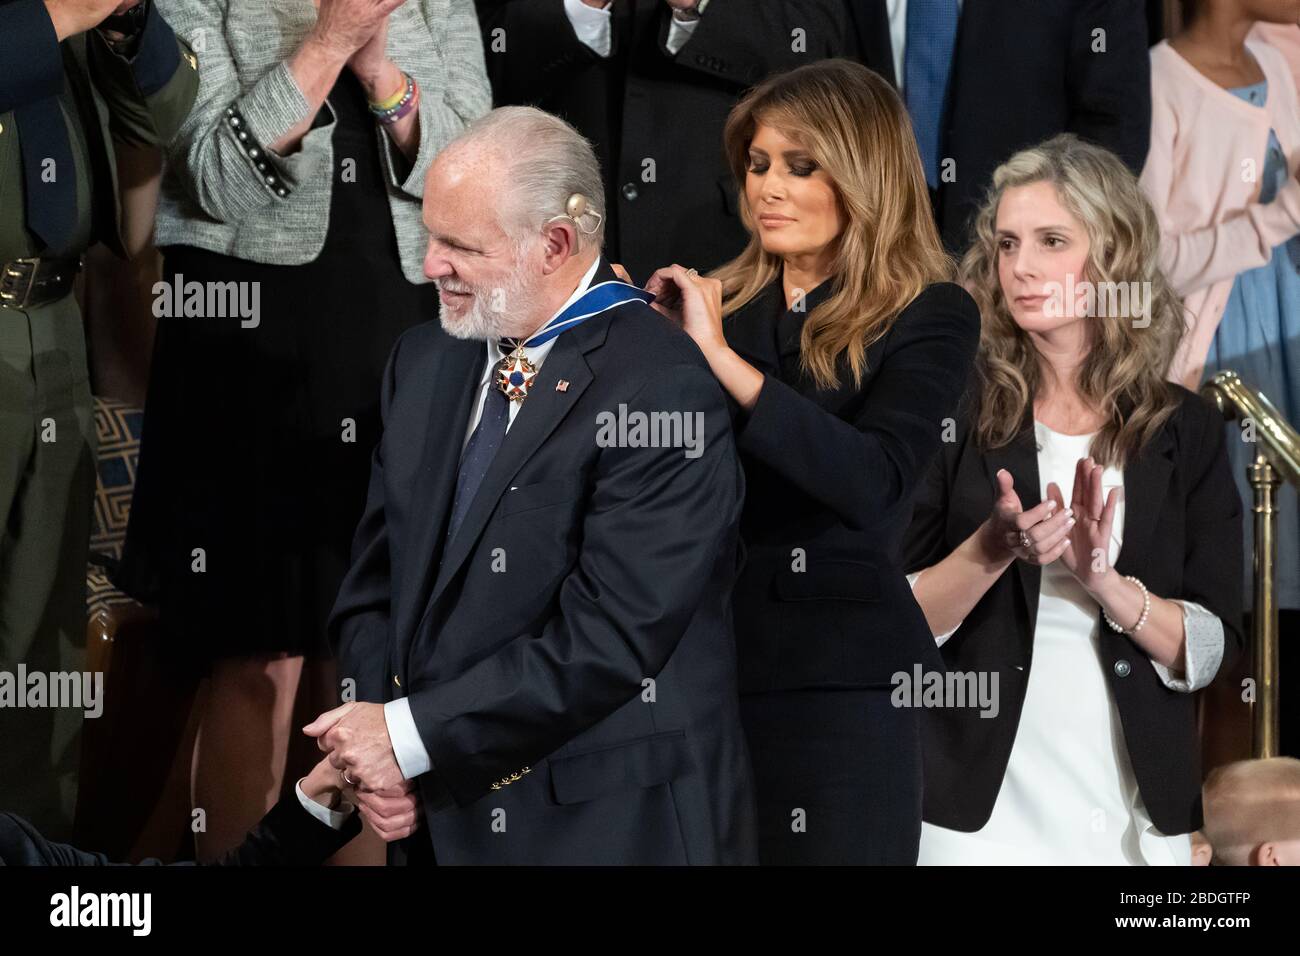 First Lady Melania Trump presents the Presidential Medal of Freedom to gallery guest Rush Limbaugh during President Donald J. Trump’s State of the Union address Tuesday, Feb. 4, 2020, in the House chamber at the U.S. Capitol in Washington, D.C. Stock Photo